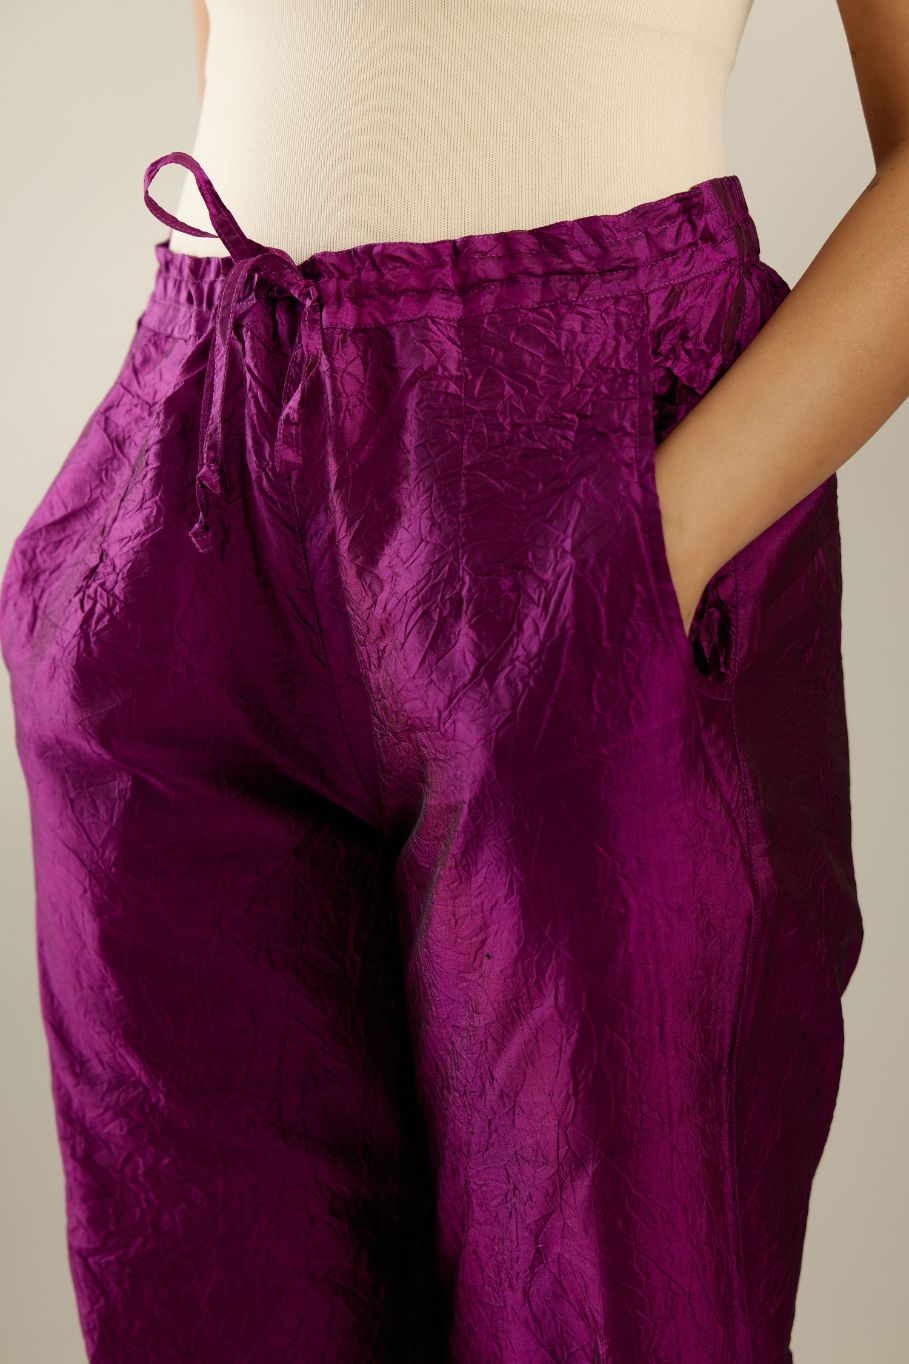 Sangria hand crushed pure silk straight pants with gold sequins work at hem and side pockets.